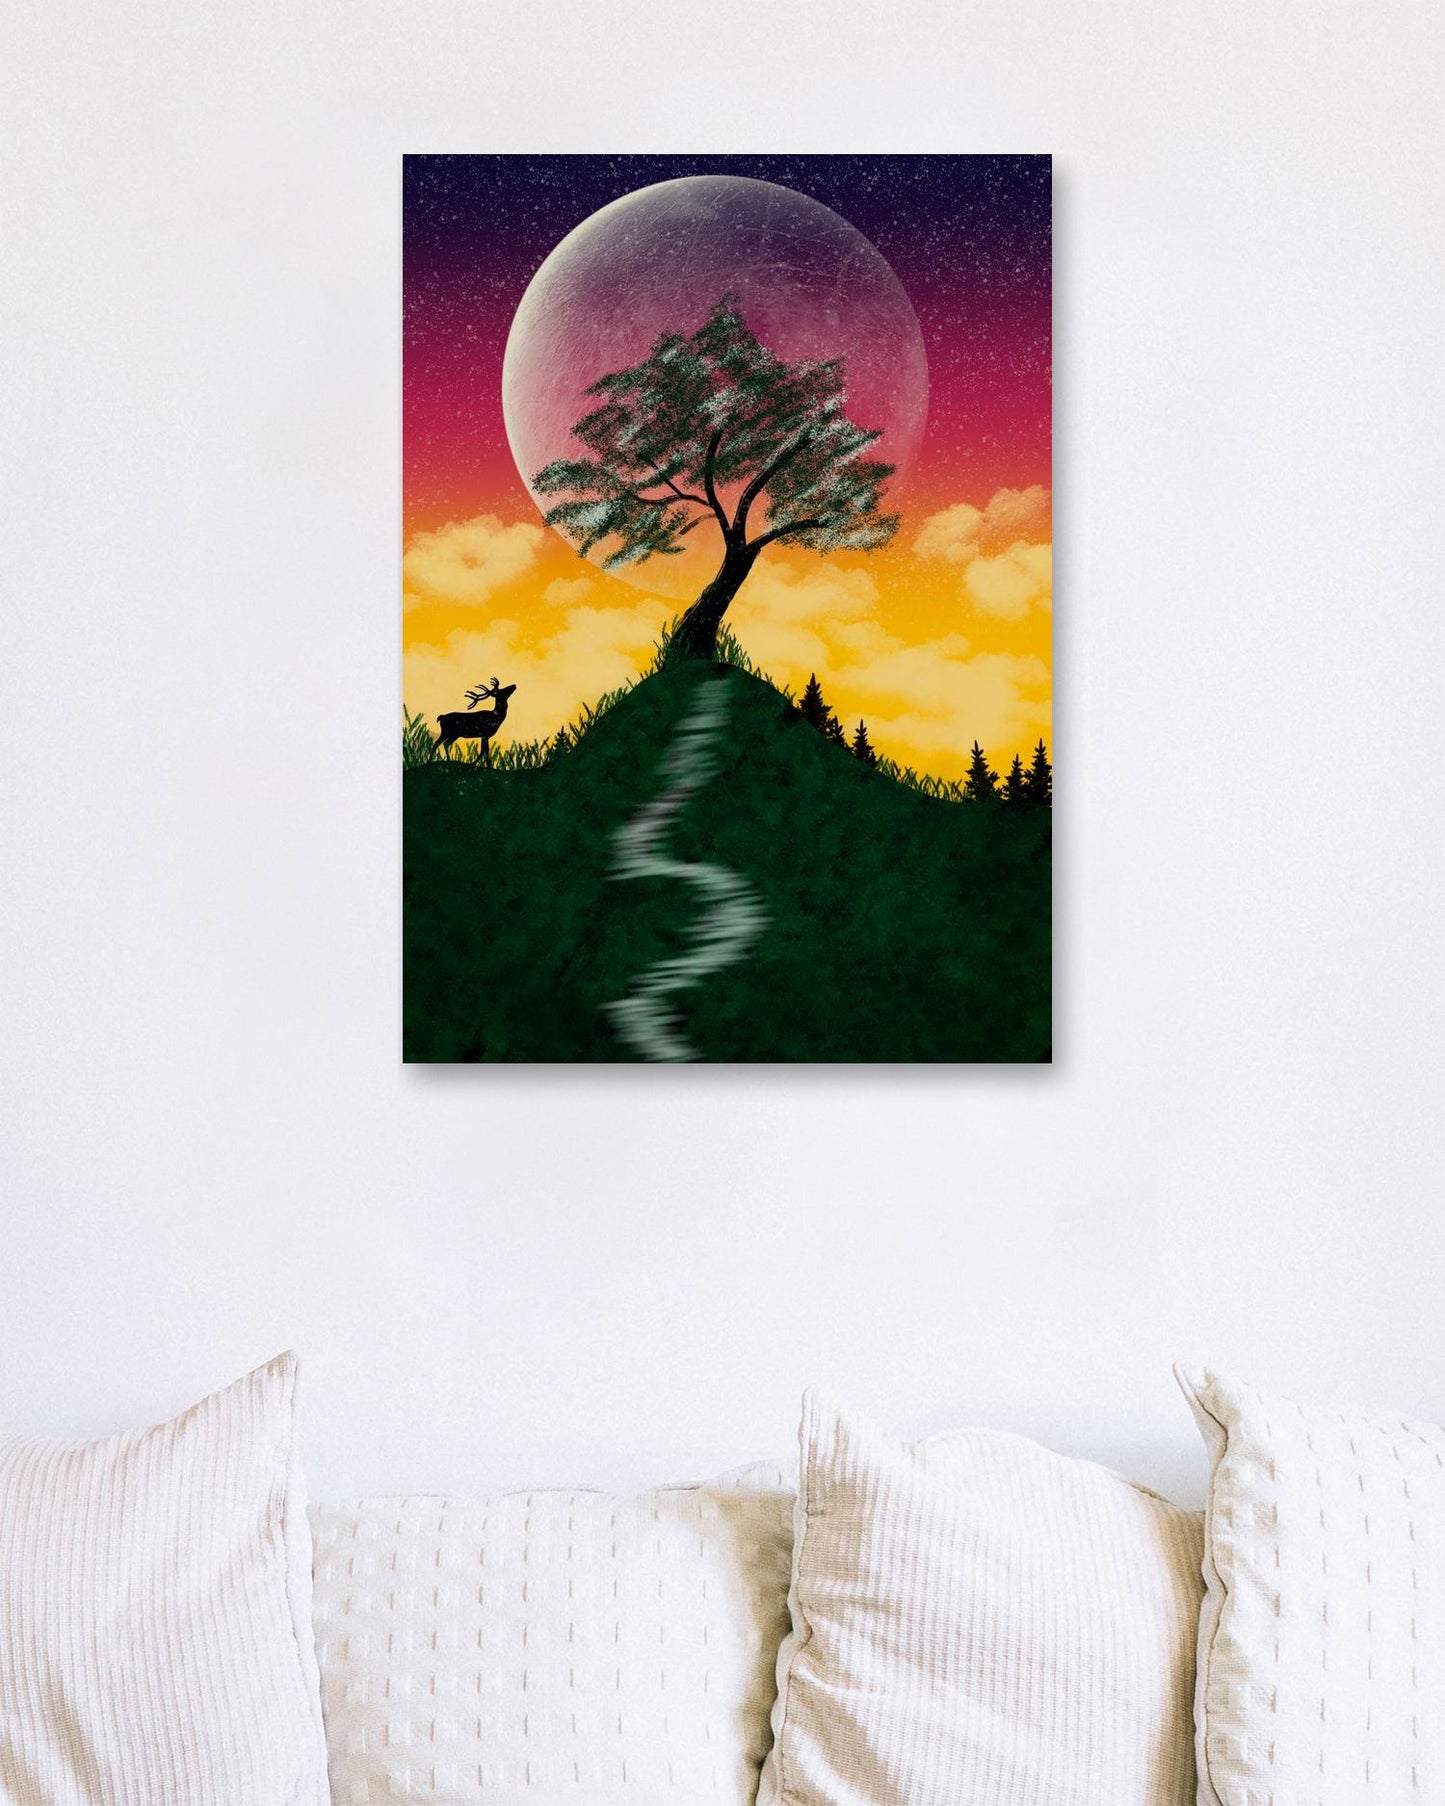 A tree behind the moon and the deer - @elzart